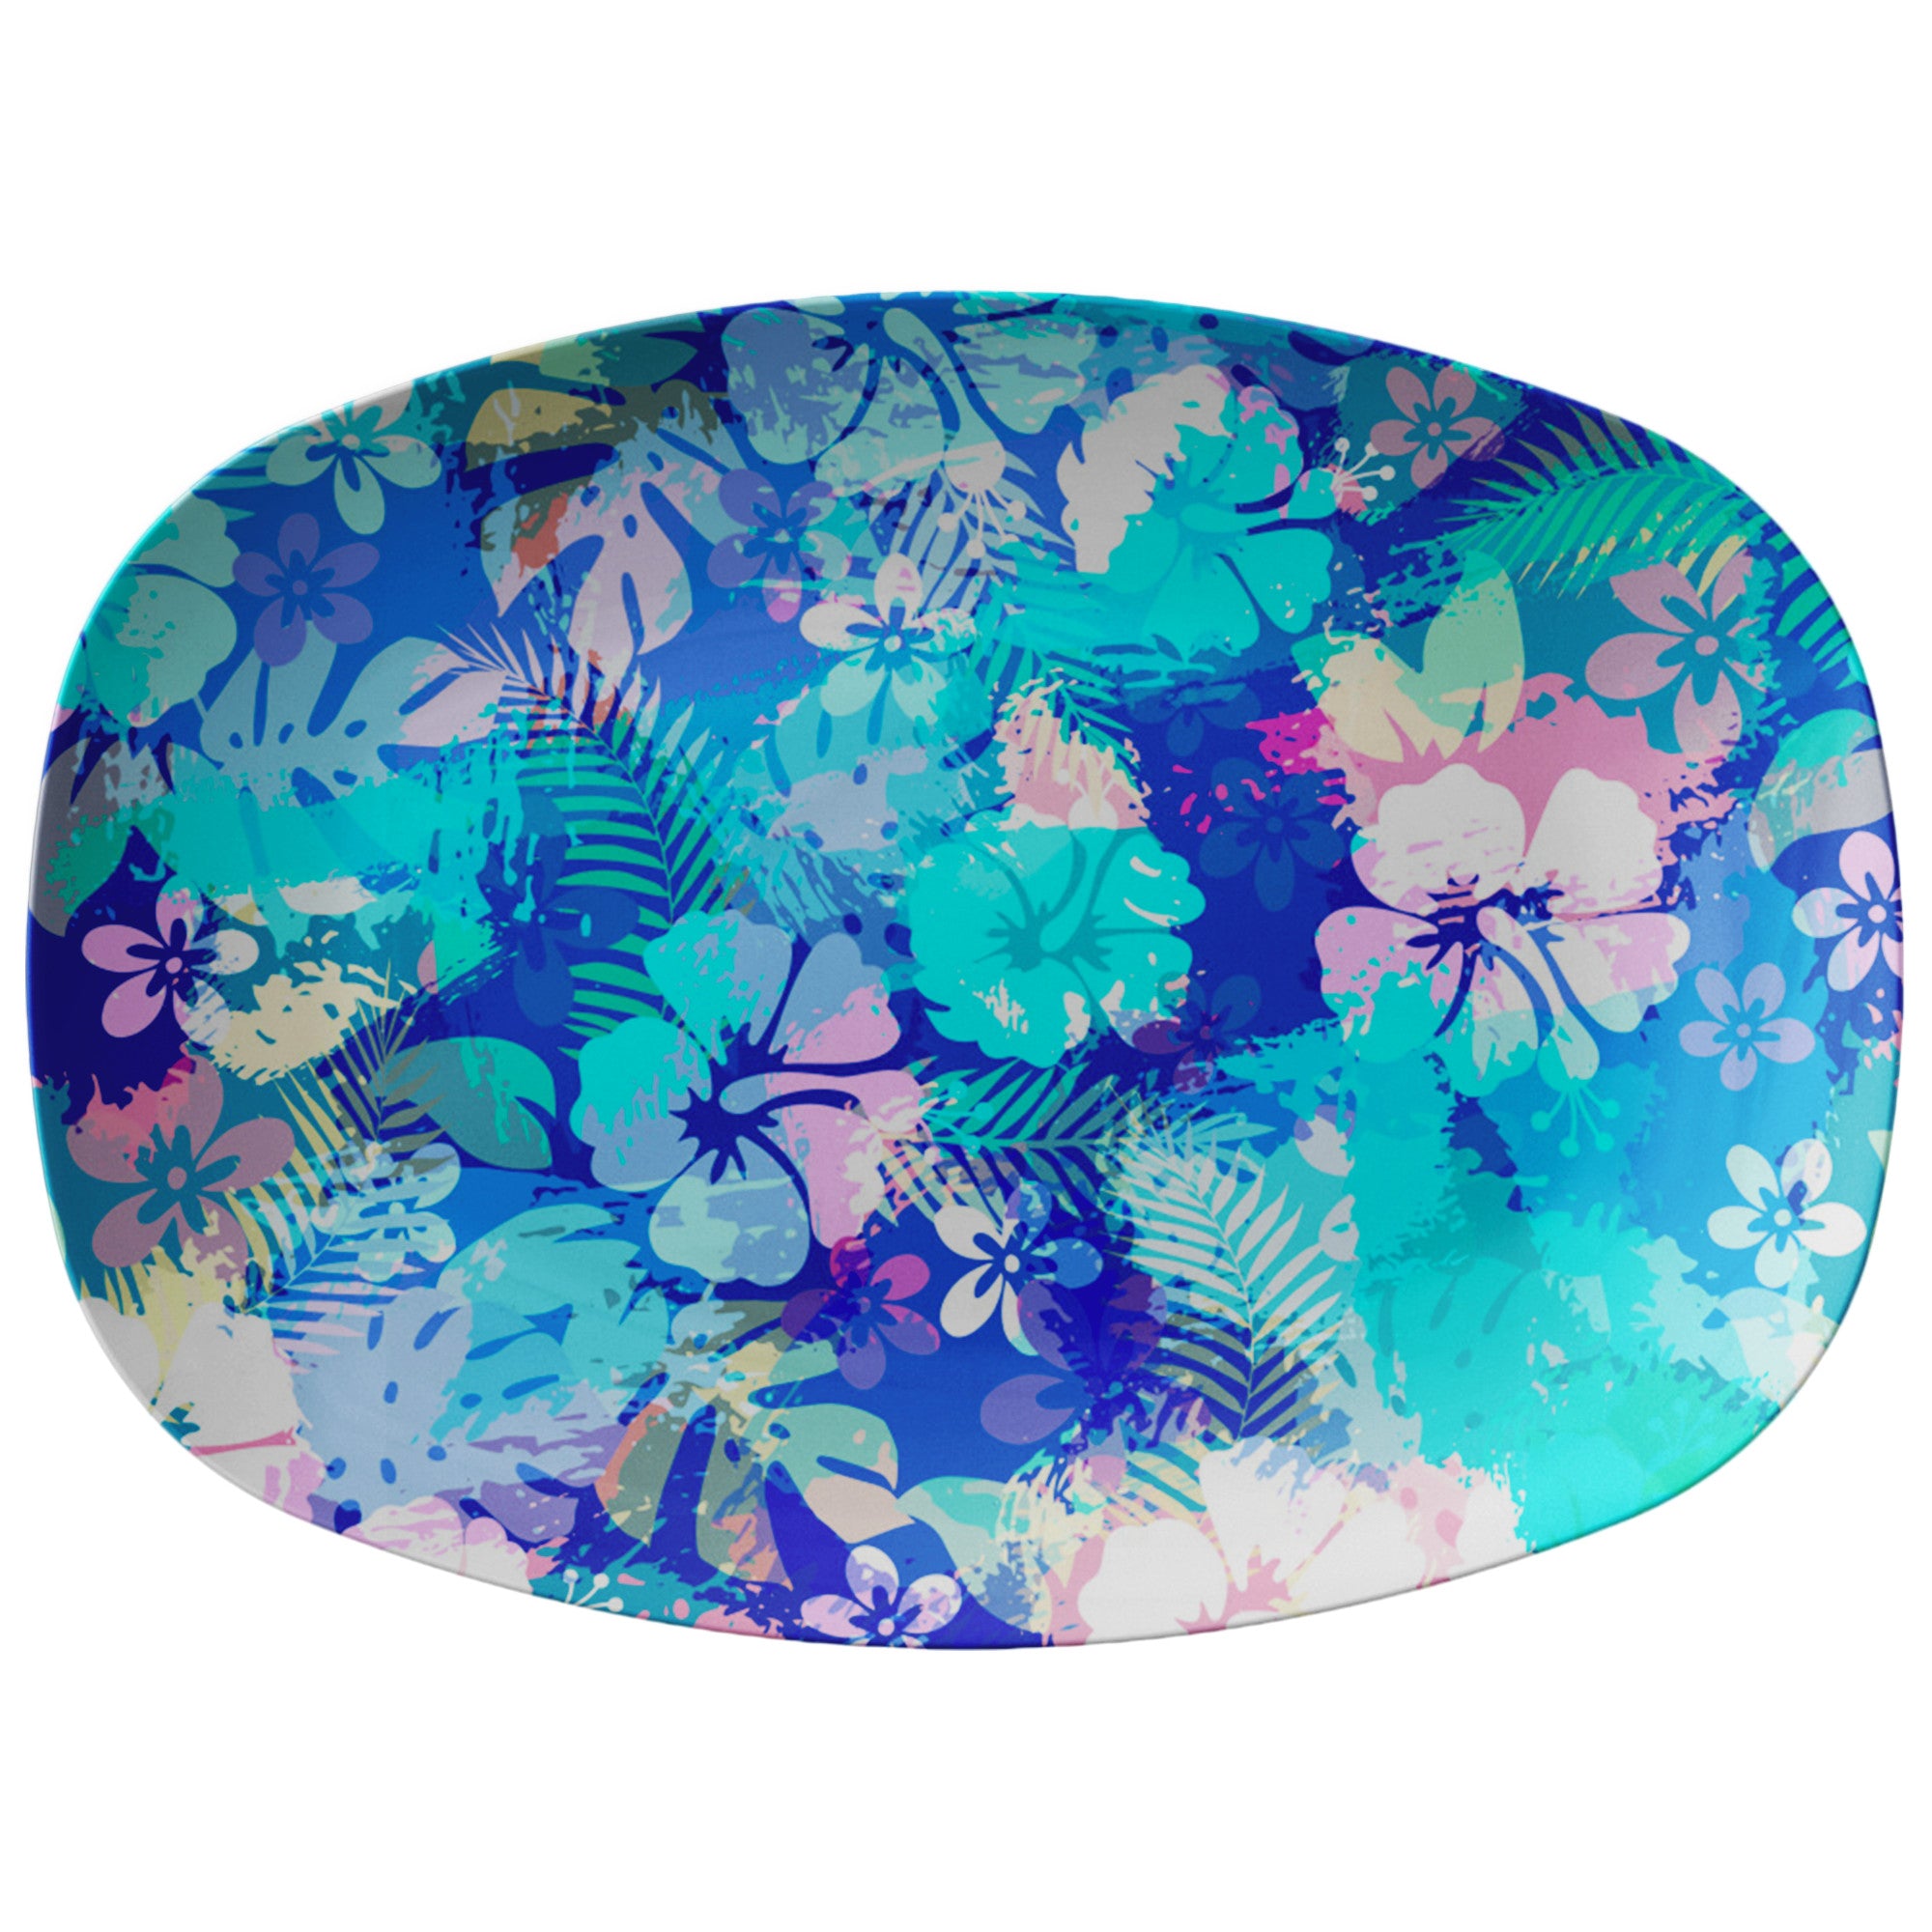 Printed Polymer Serving Platter - Hibiscus in Teal